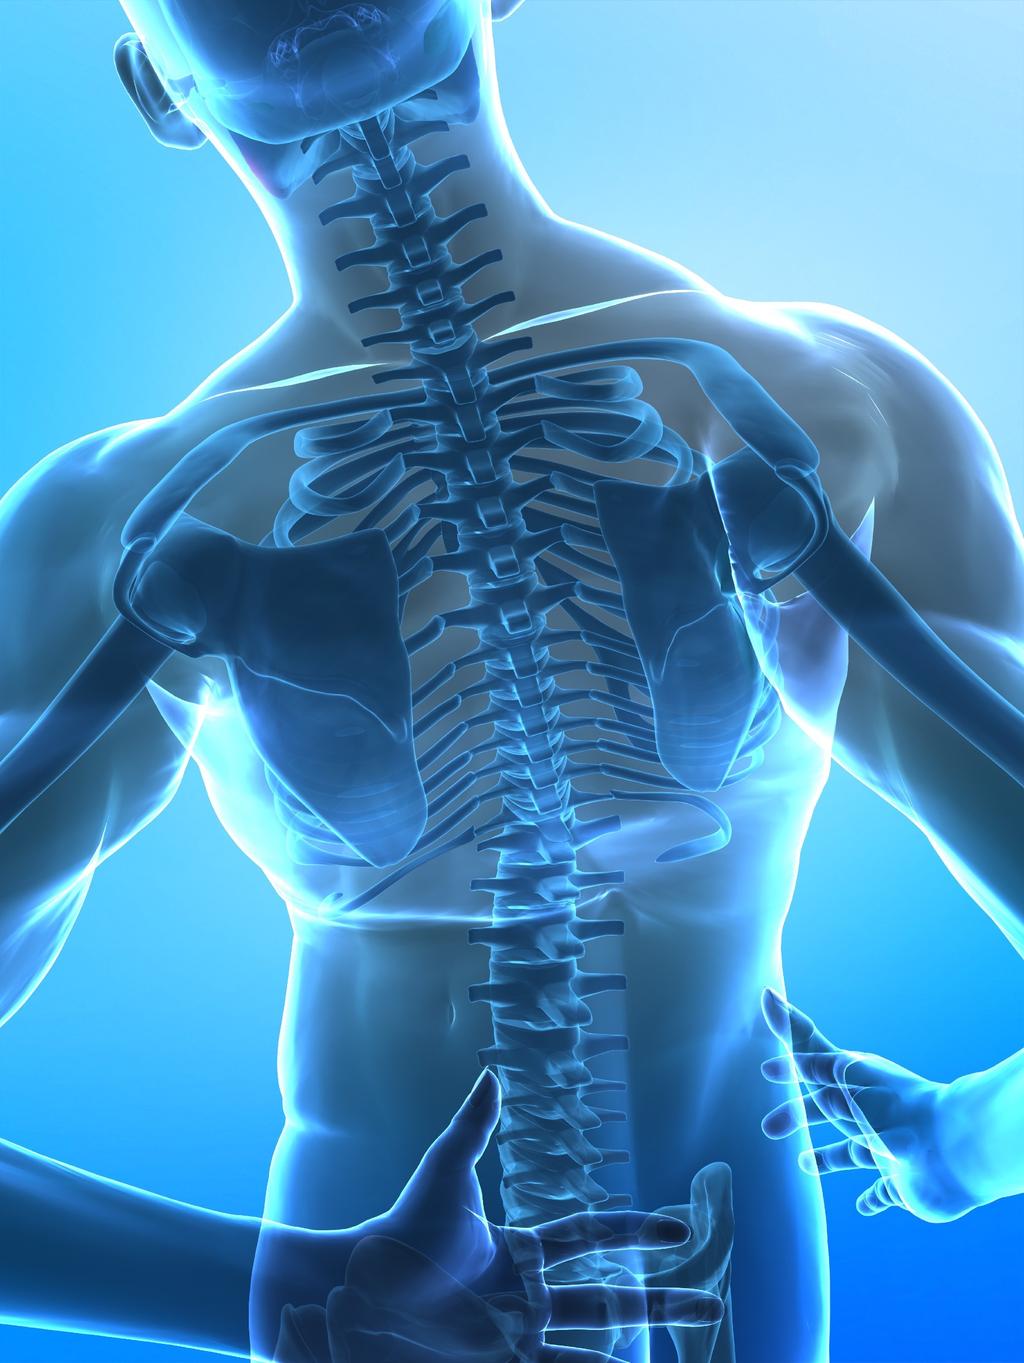 RECOVERY AFTER SURGERY As mentioned, the recovery plan after spinal surgery will differ from case to case, but some common recommendations include: Controlling pain Applying ice, avoiding certain